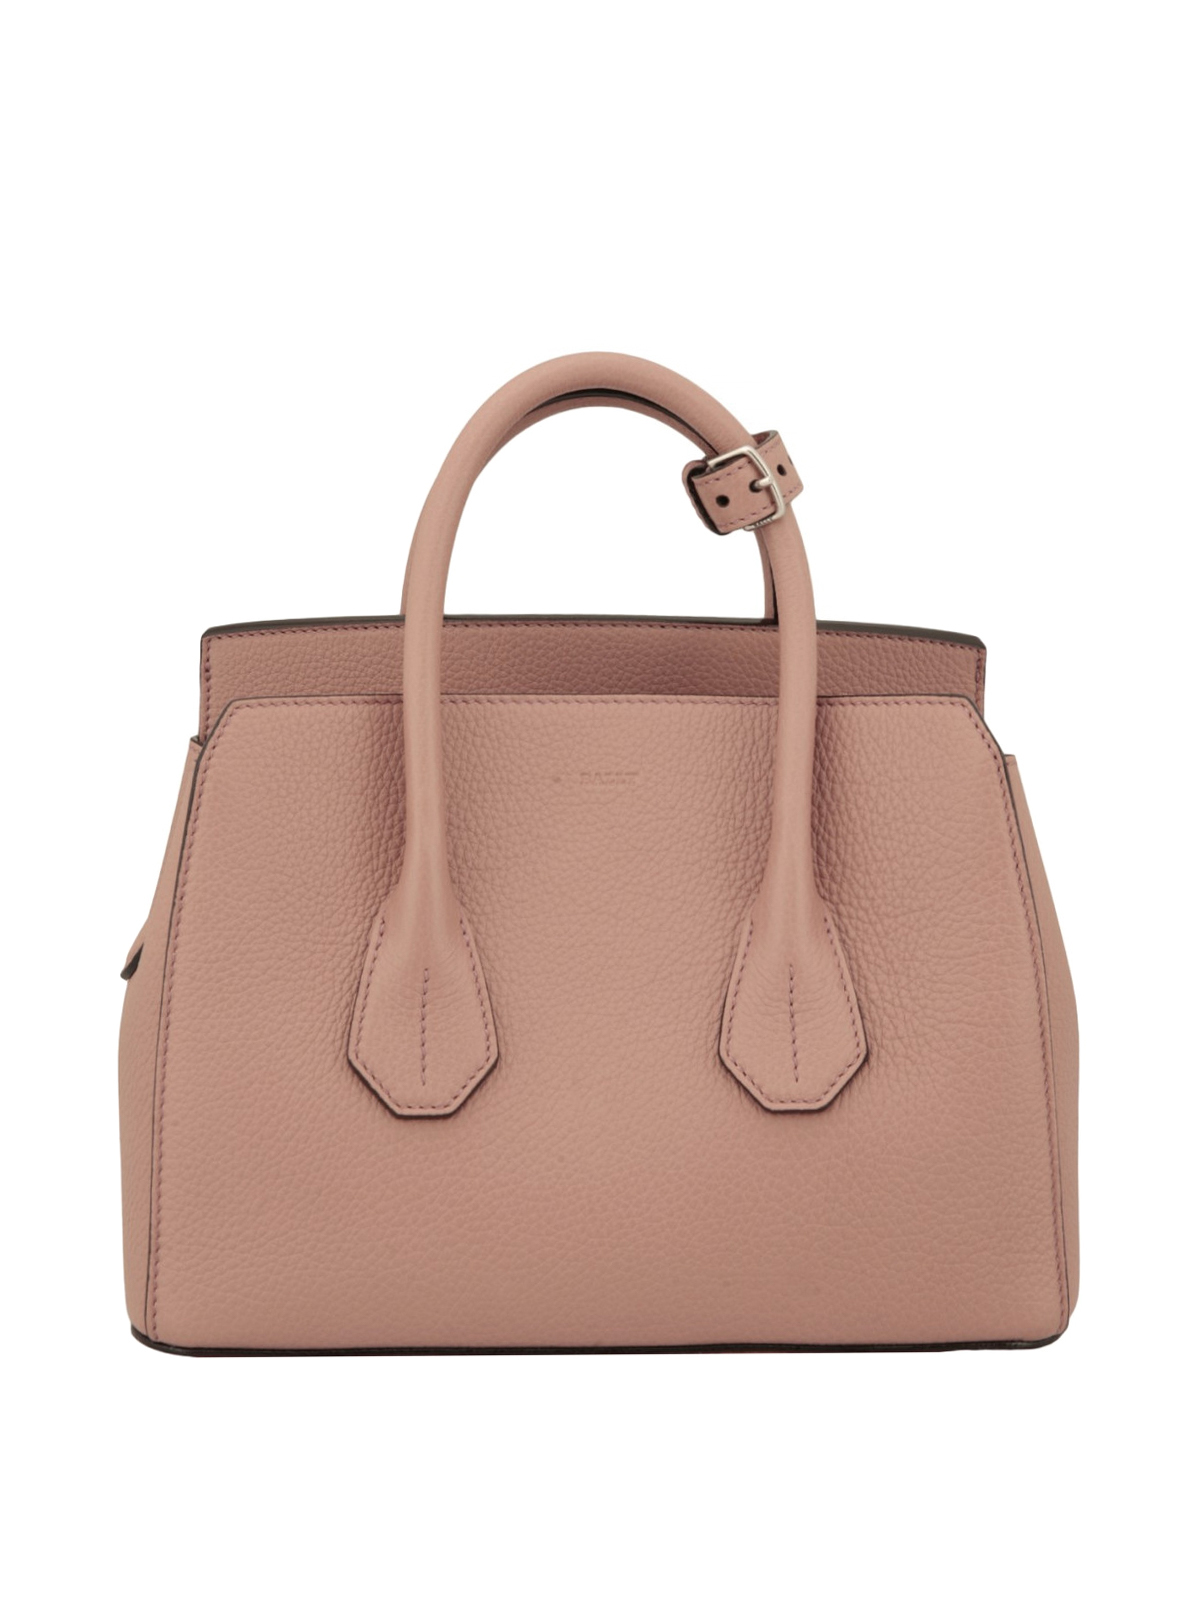 Totes bags Bally - Sommet small leather tote ...